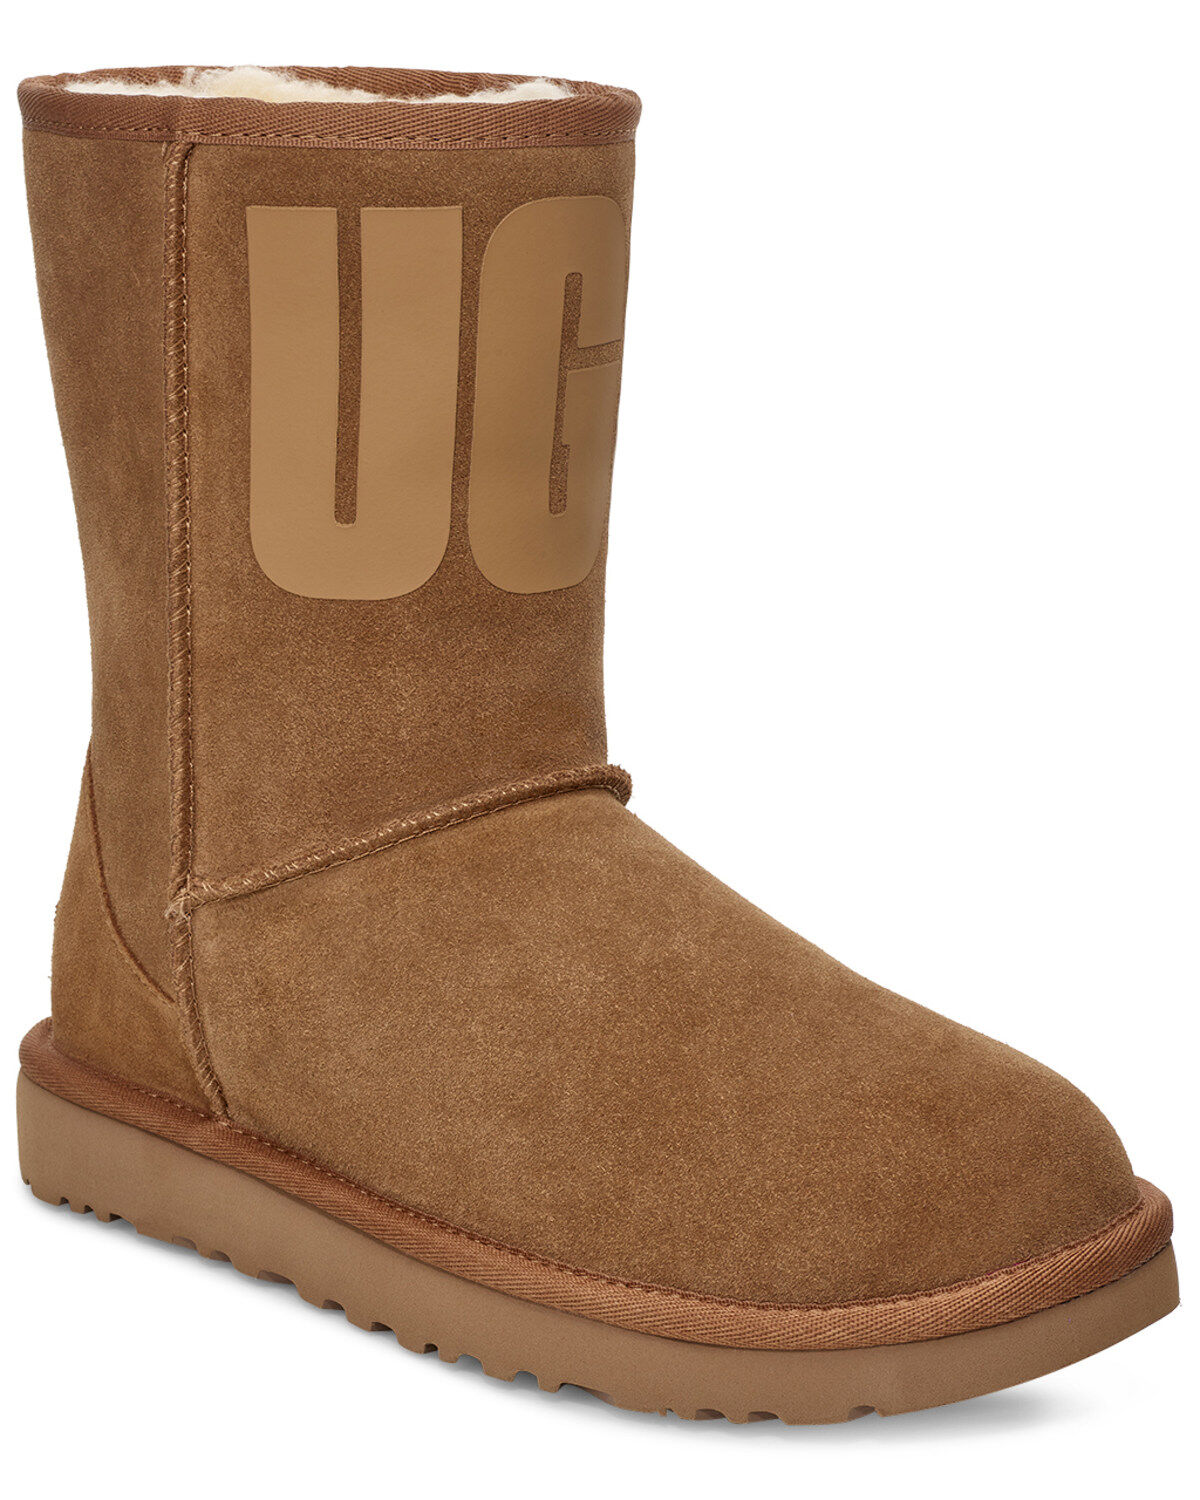 women's classic uggs boots on sale